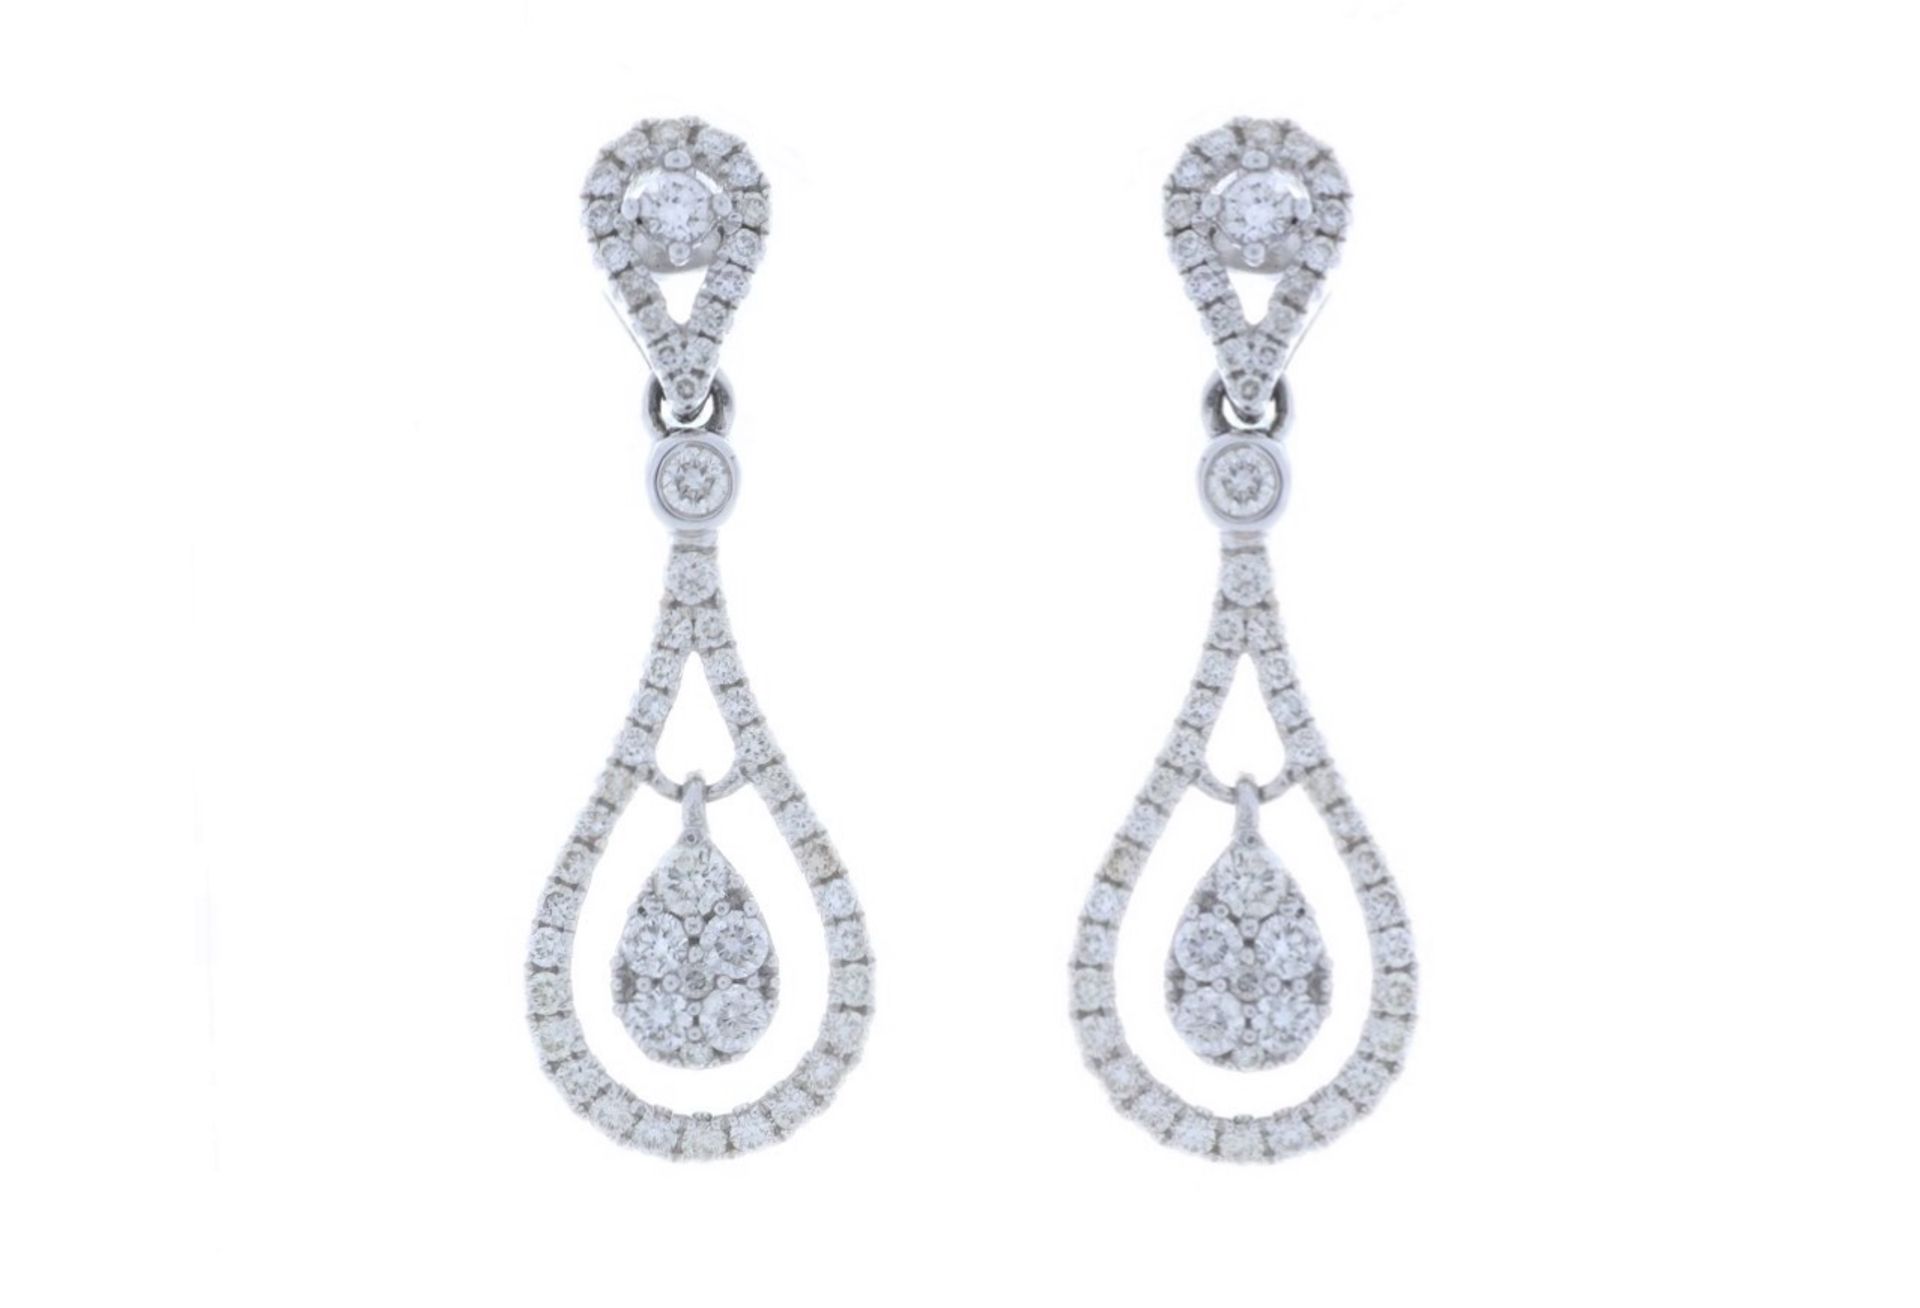 18ct White Gold Diamond Drop Earrings 1.00 Carats - Valued by GIE £15,000.00 - Fifty three natural